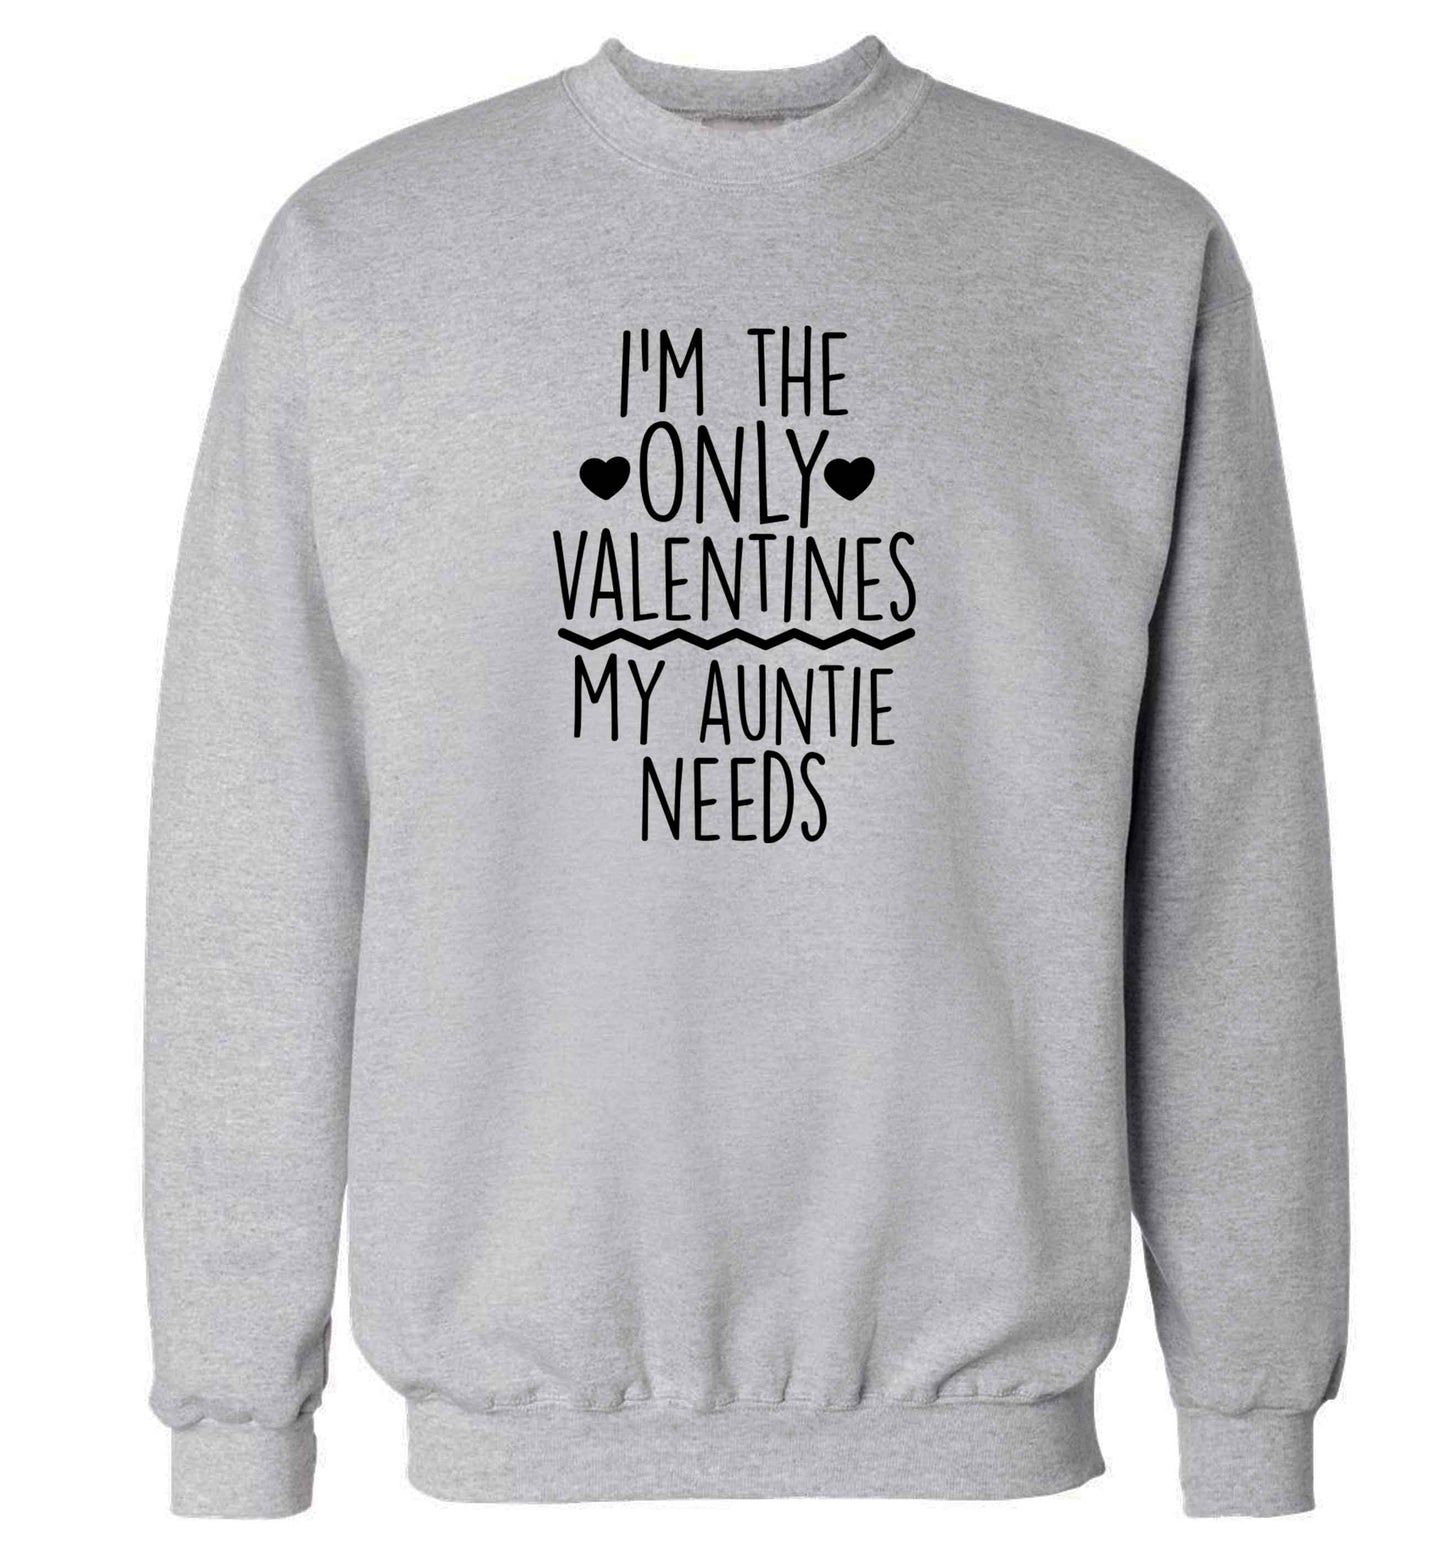 I'm the only valentines my auntie needs adult's unisex grey sweater 2XL